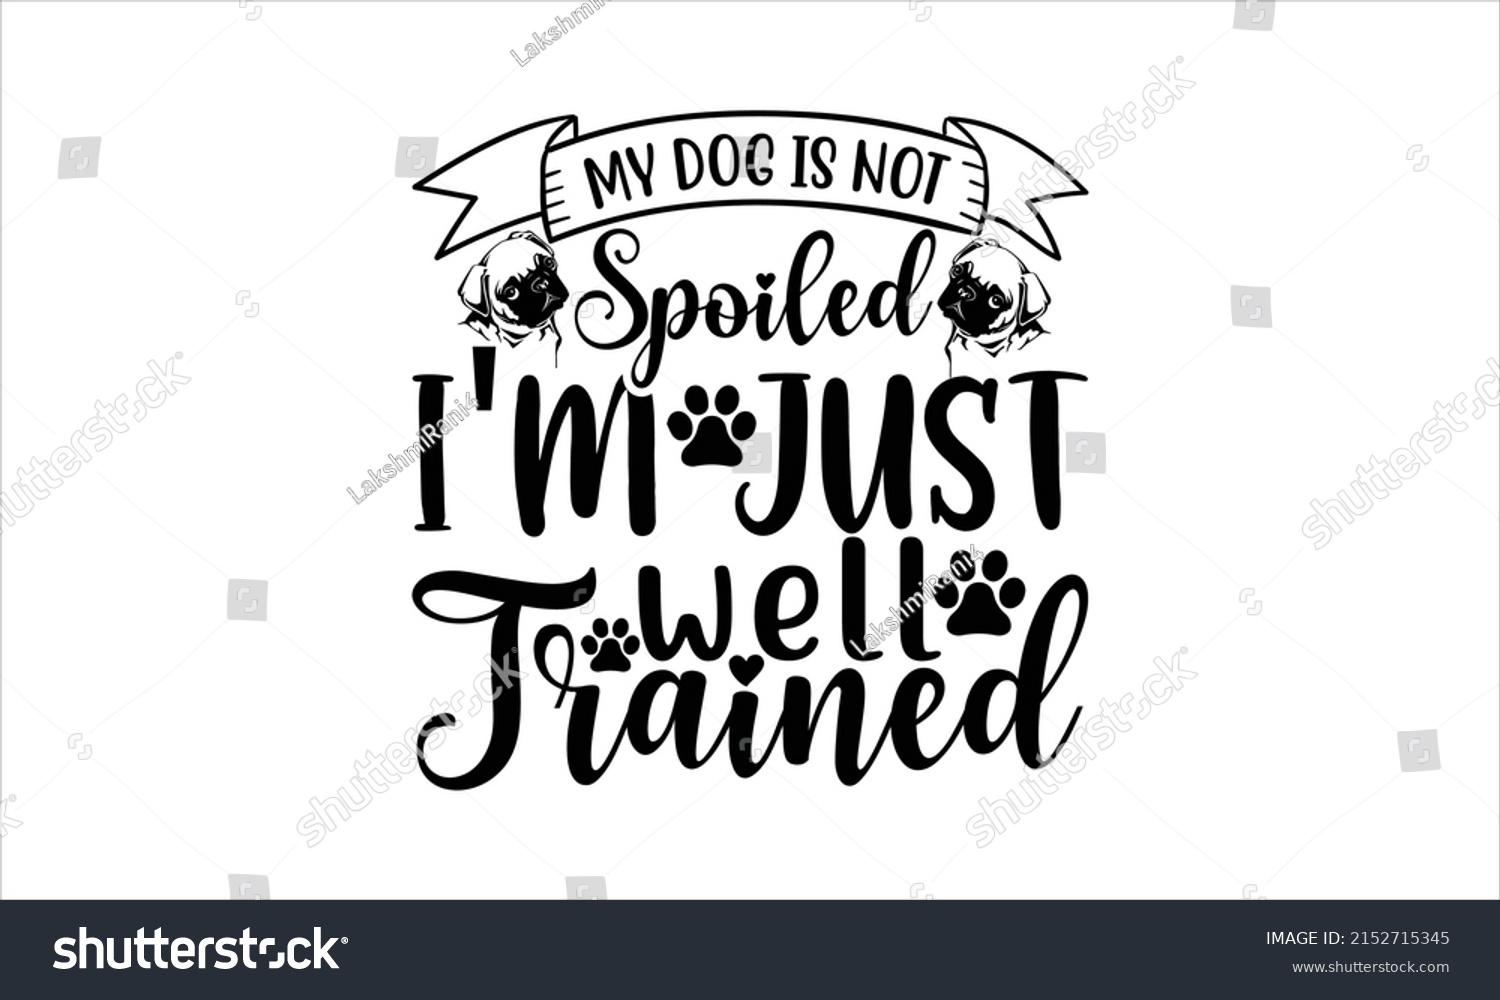 SVG of My dog is not spoiled I'm just well trained   -   Lettering design for greeting banners, Mouse Pads, Prints, Cards and Posters, Mugs, Notebooks, Floor Pillows and T-shirt prints design.
 svg